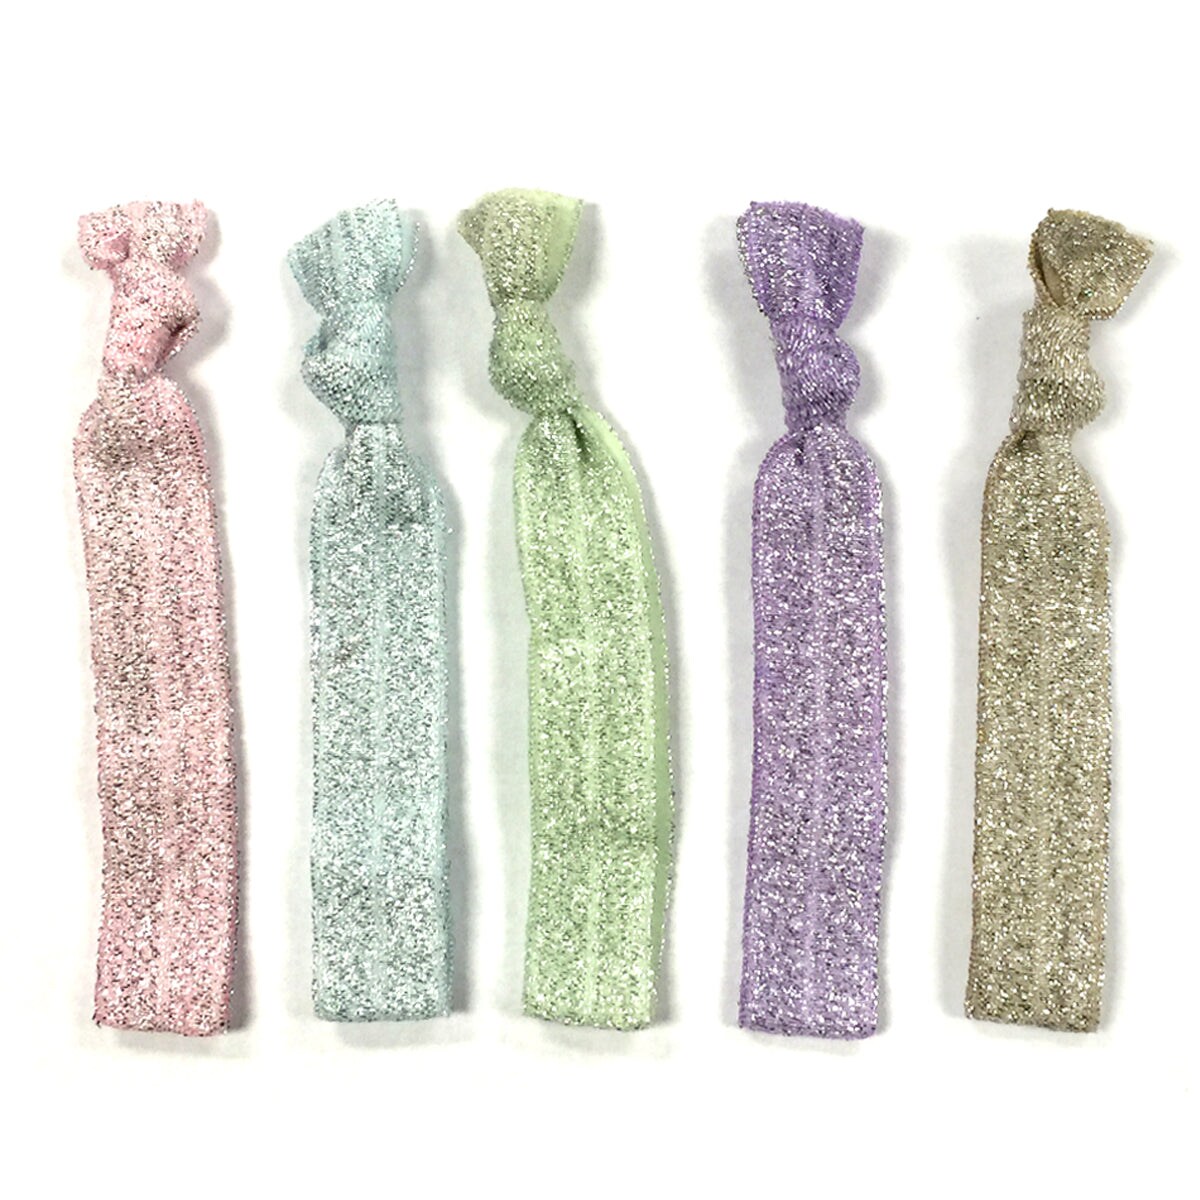 Wrapables Colorful Hair Ties Ponytail Holders (Set of 5), Pastel Glitter